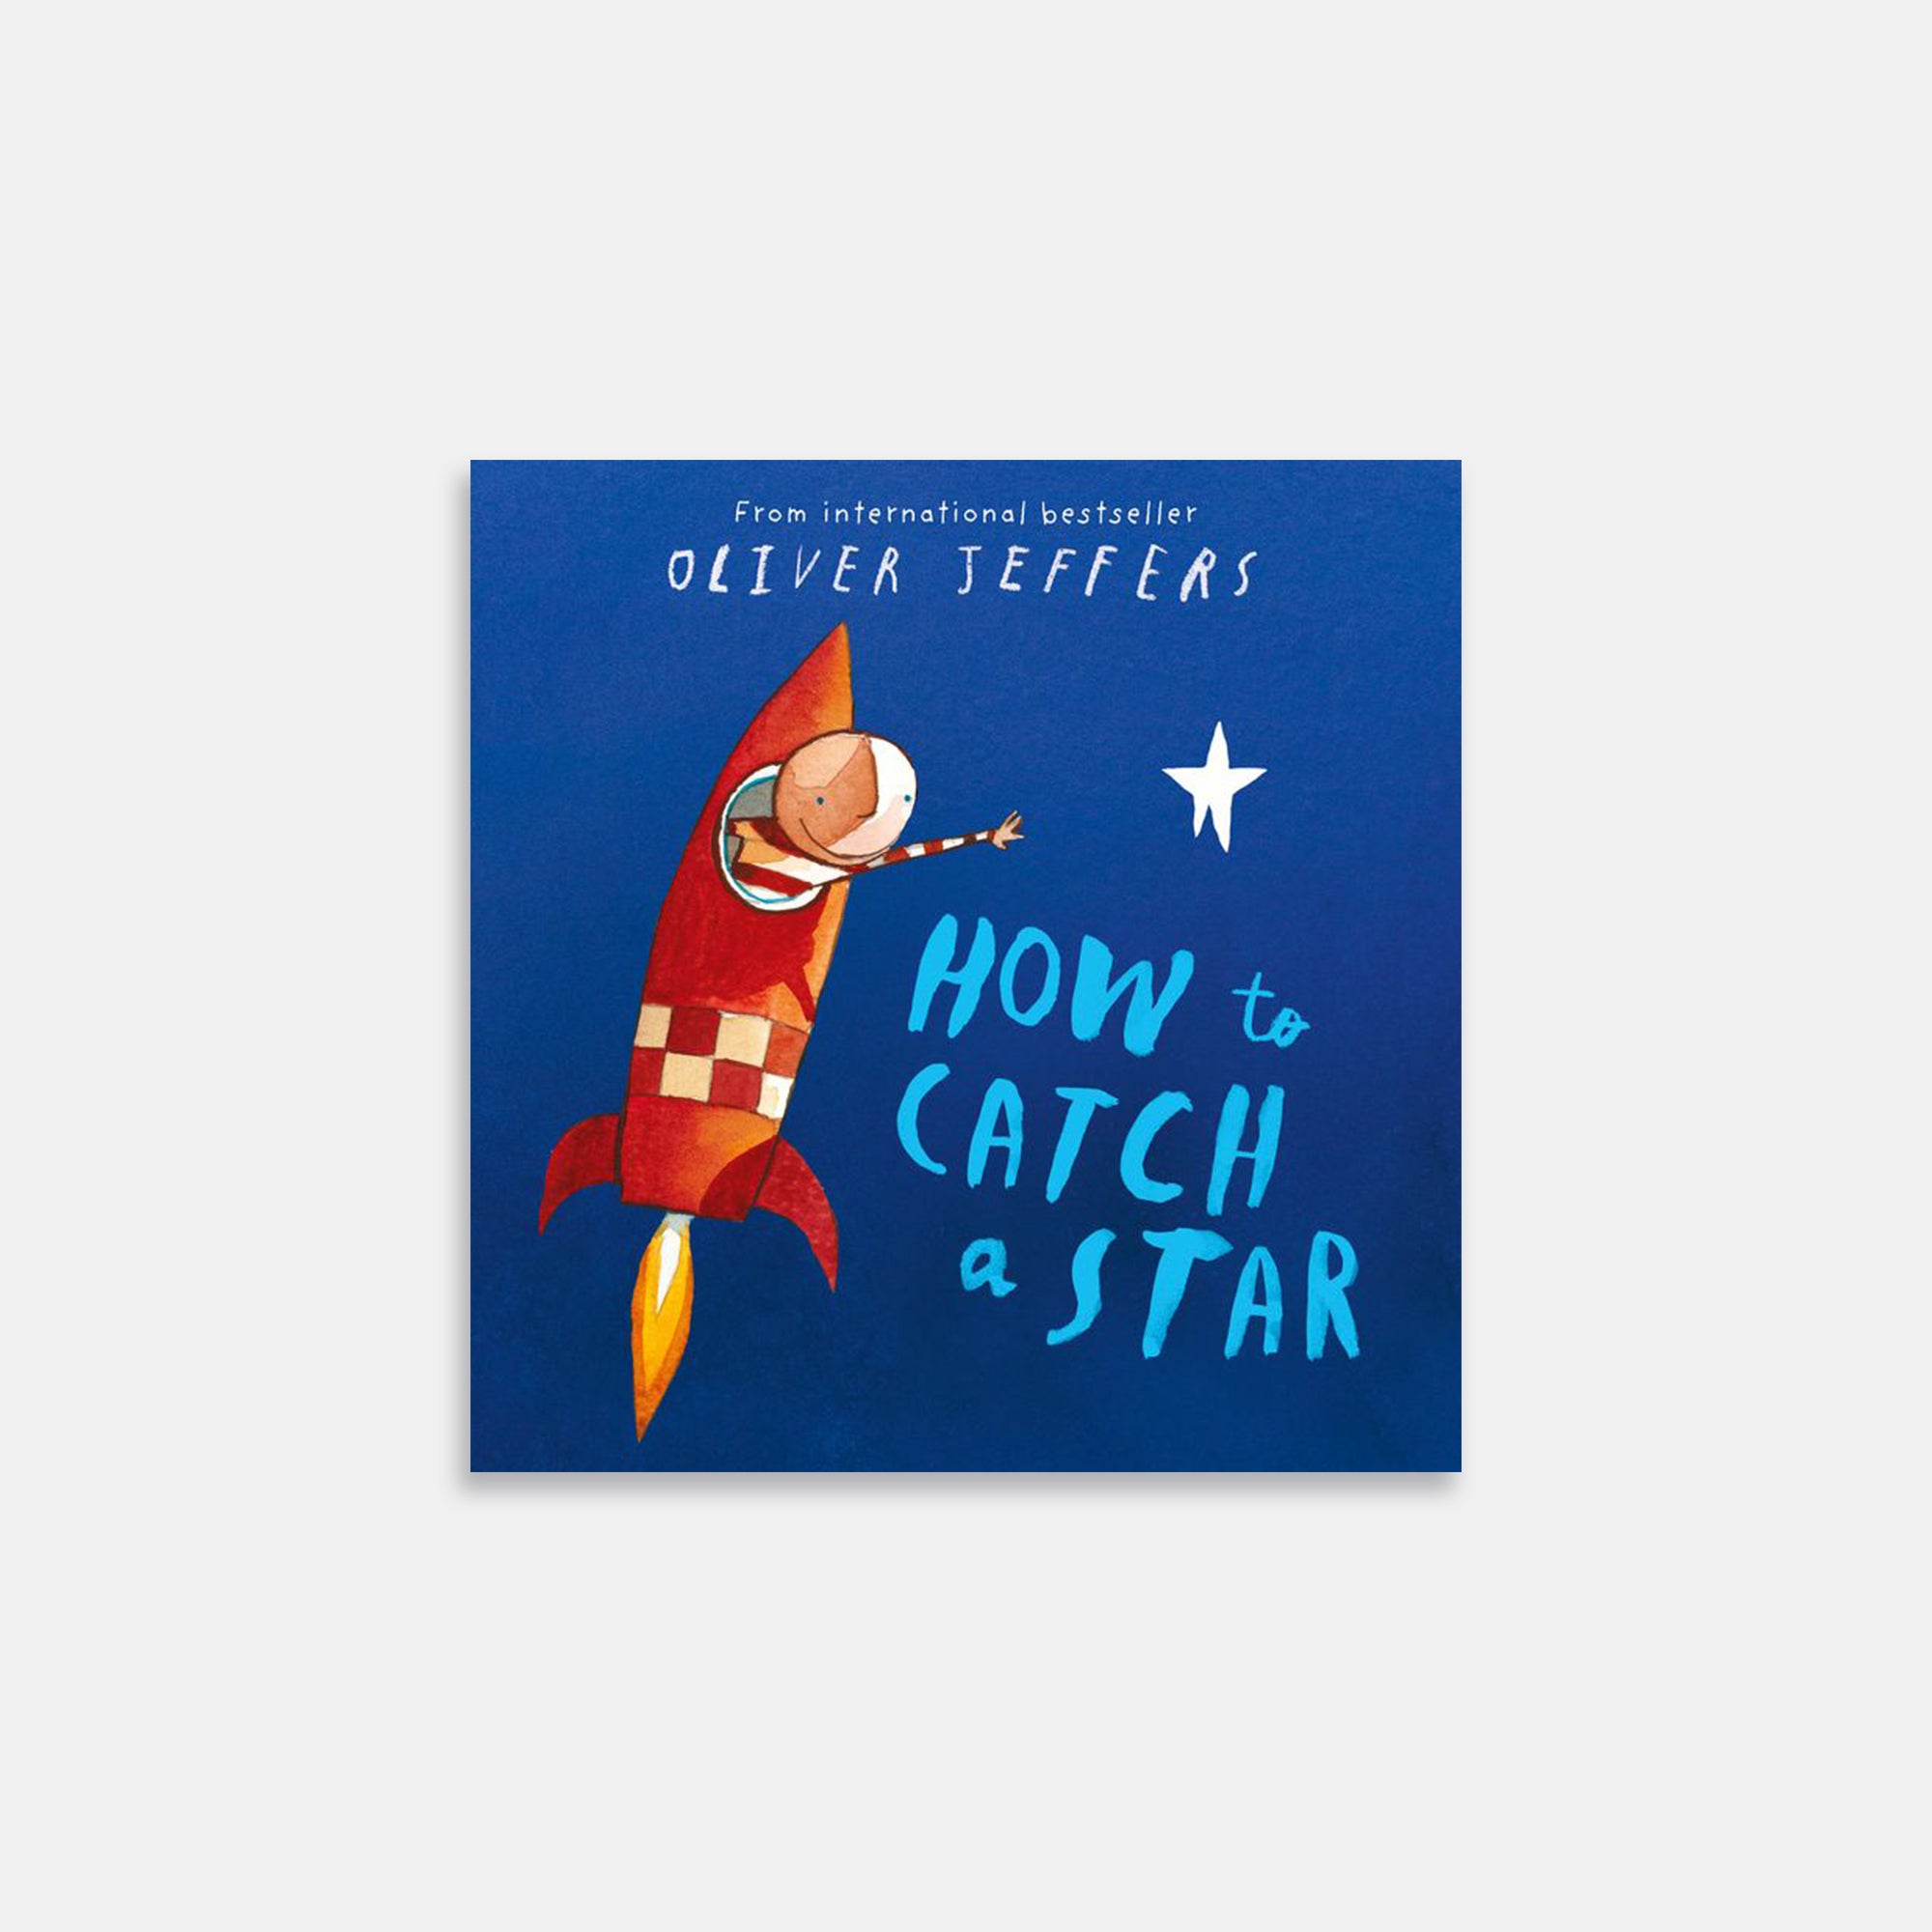 How To Catch a Star